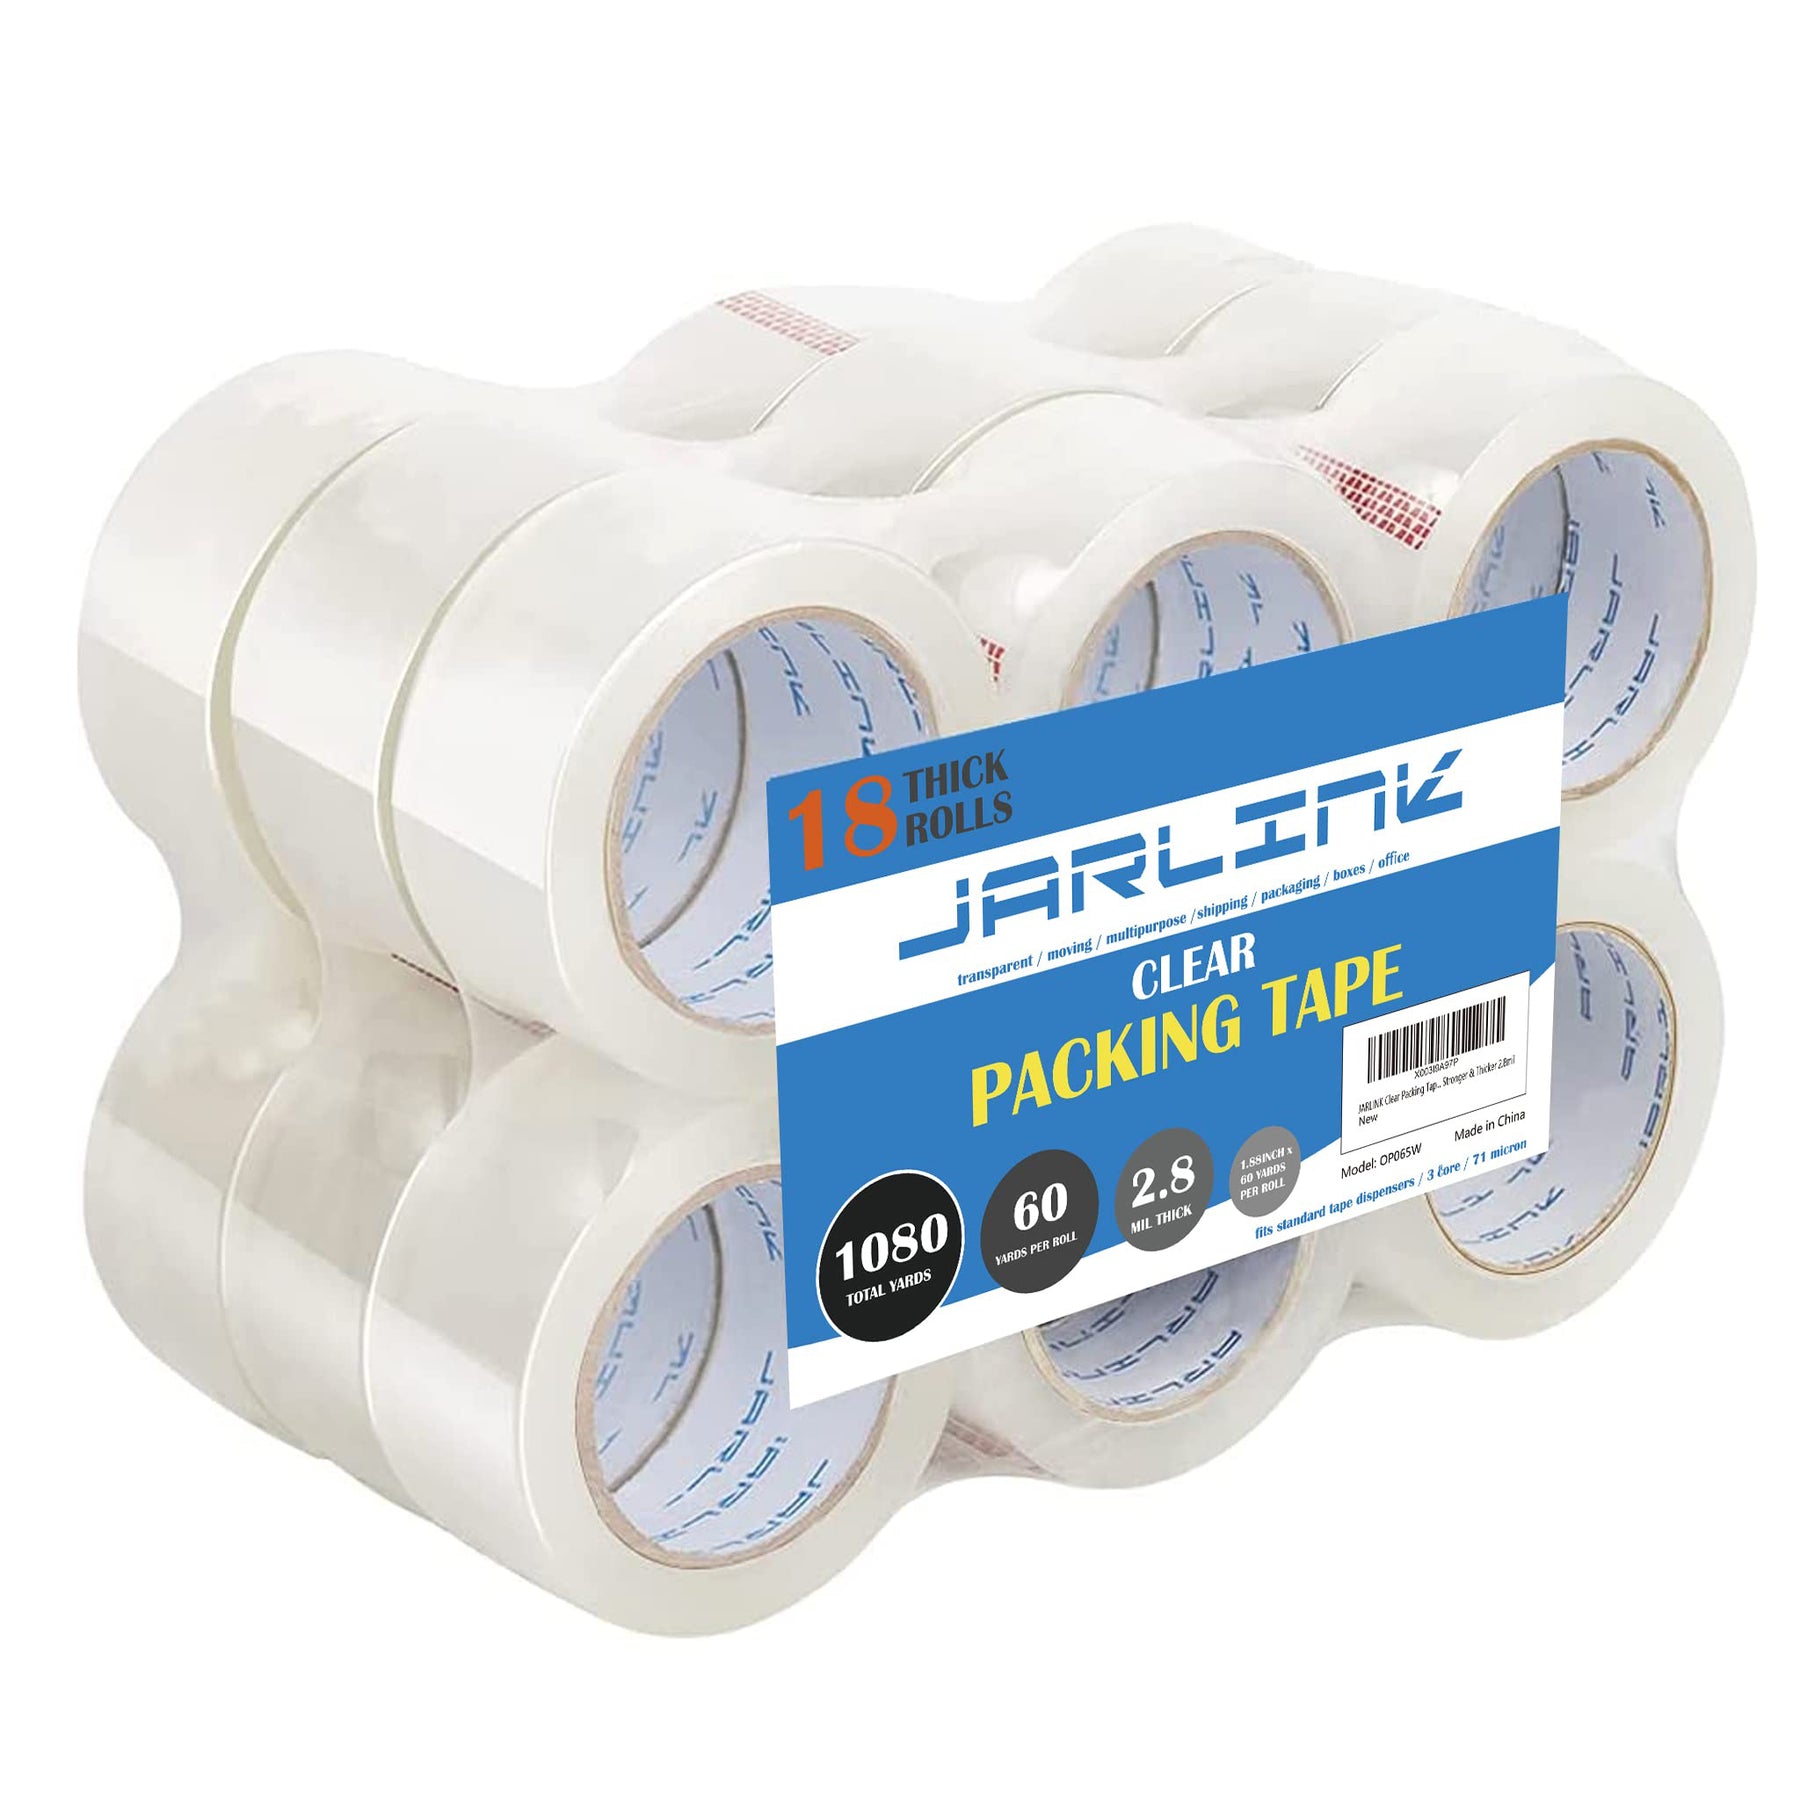 Secure Your Packages with High-Strength Transparent Tape - 2 inches x 65  meters, Self-Adhesive, Pack of Rolls at WisyCart